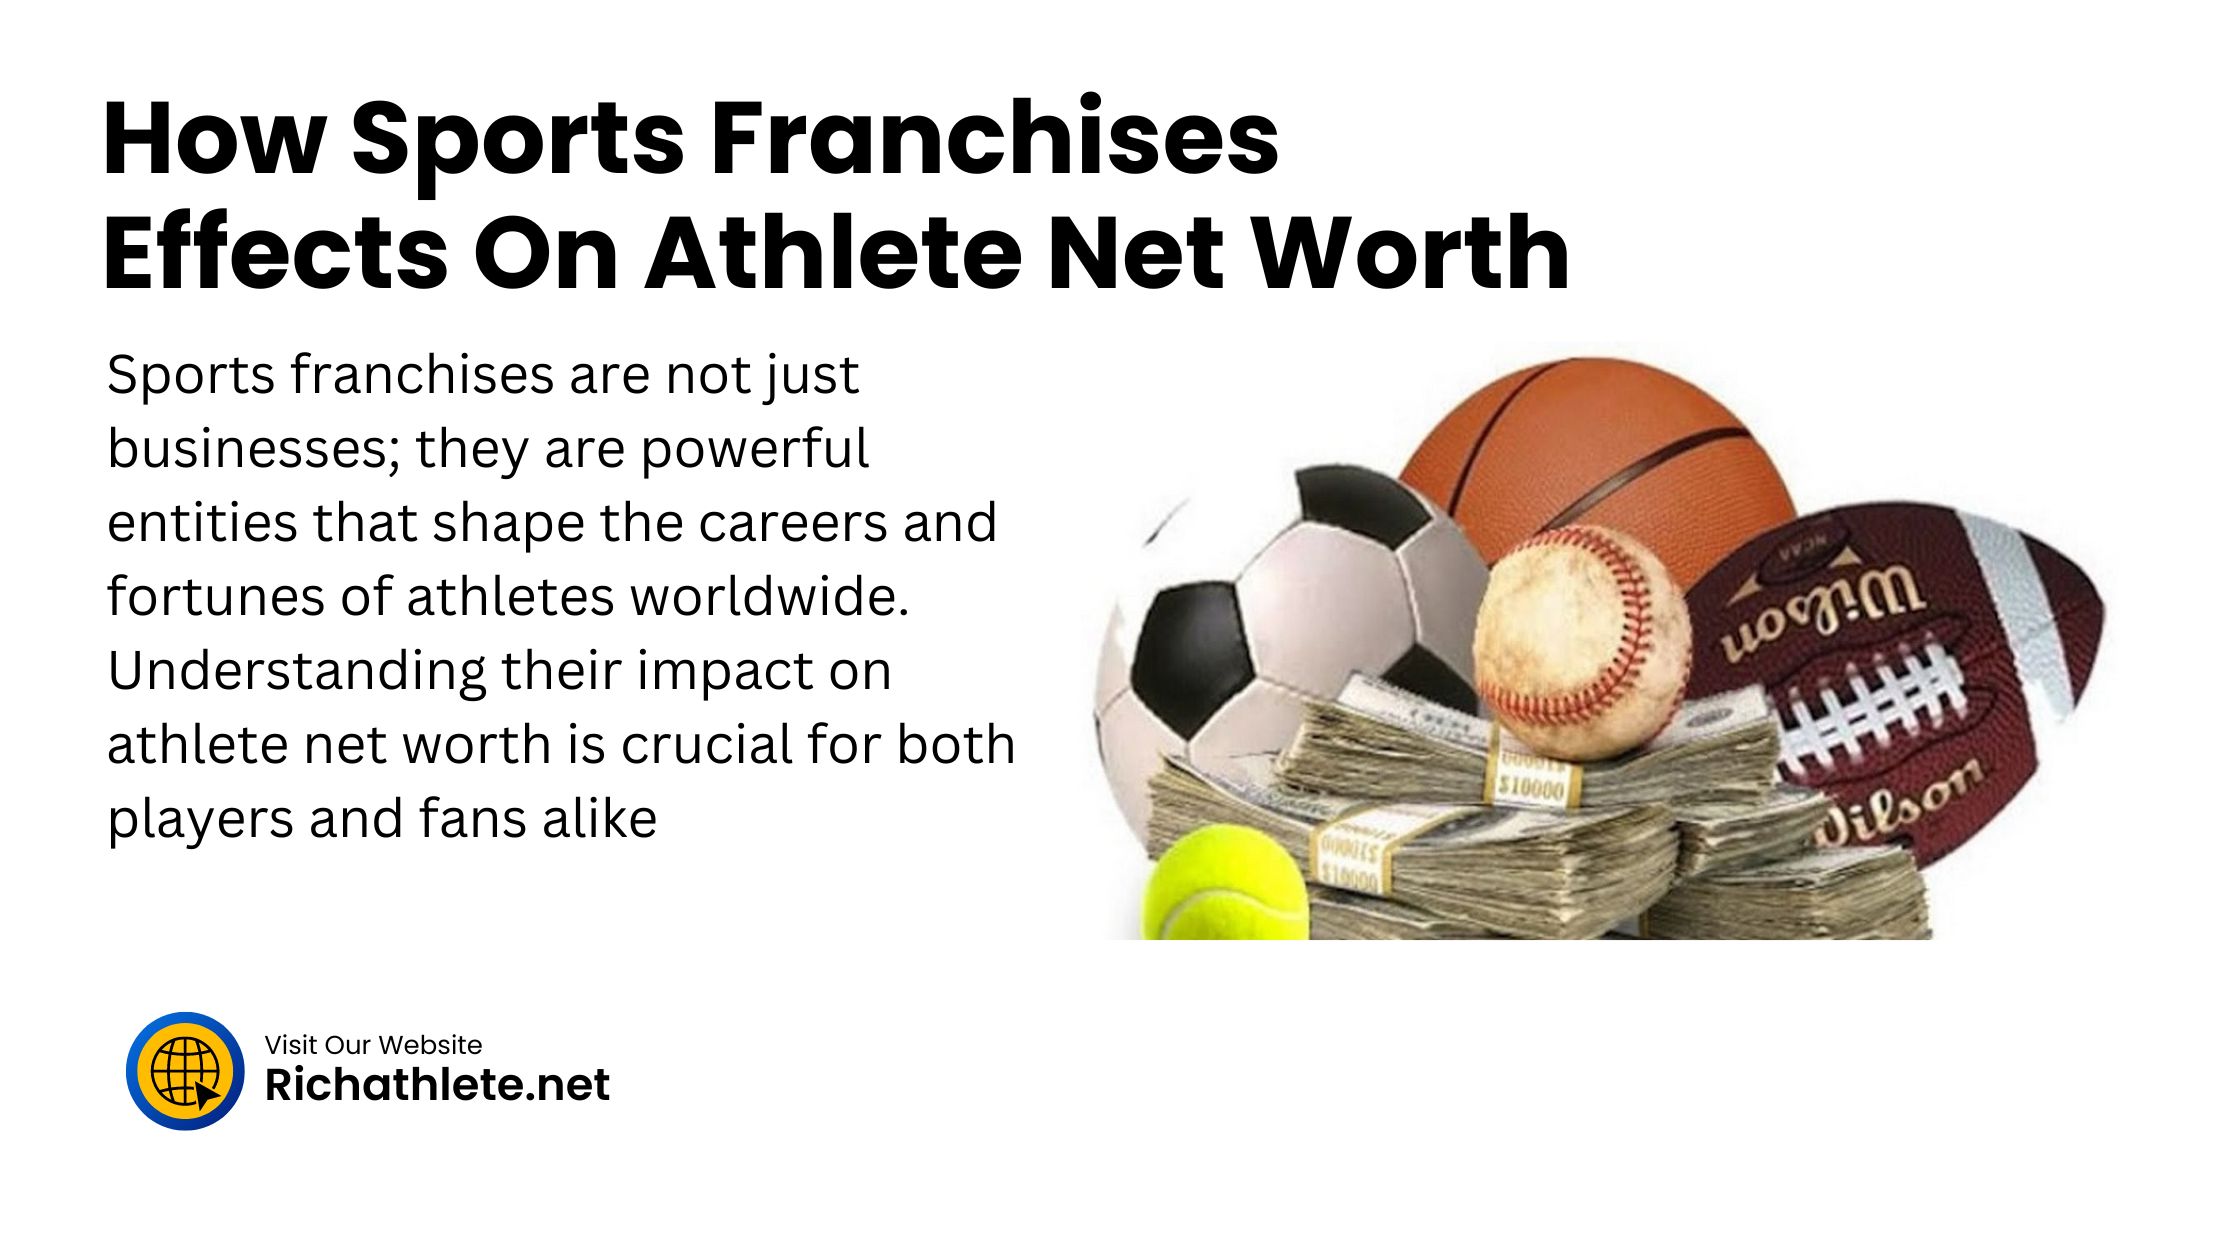 How Sports Franchises Effects On Athlete Net Worth